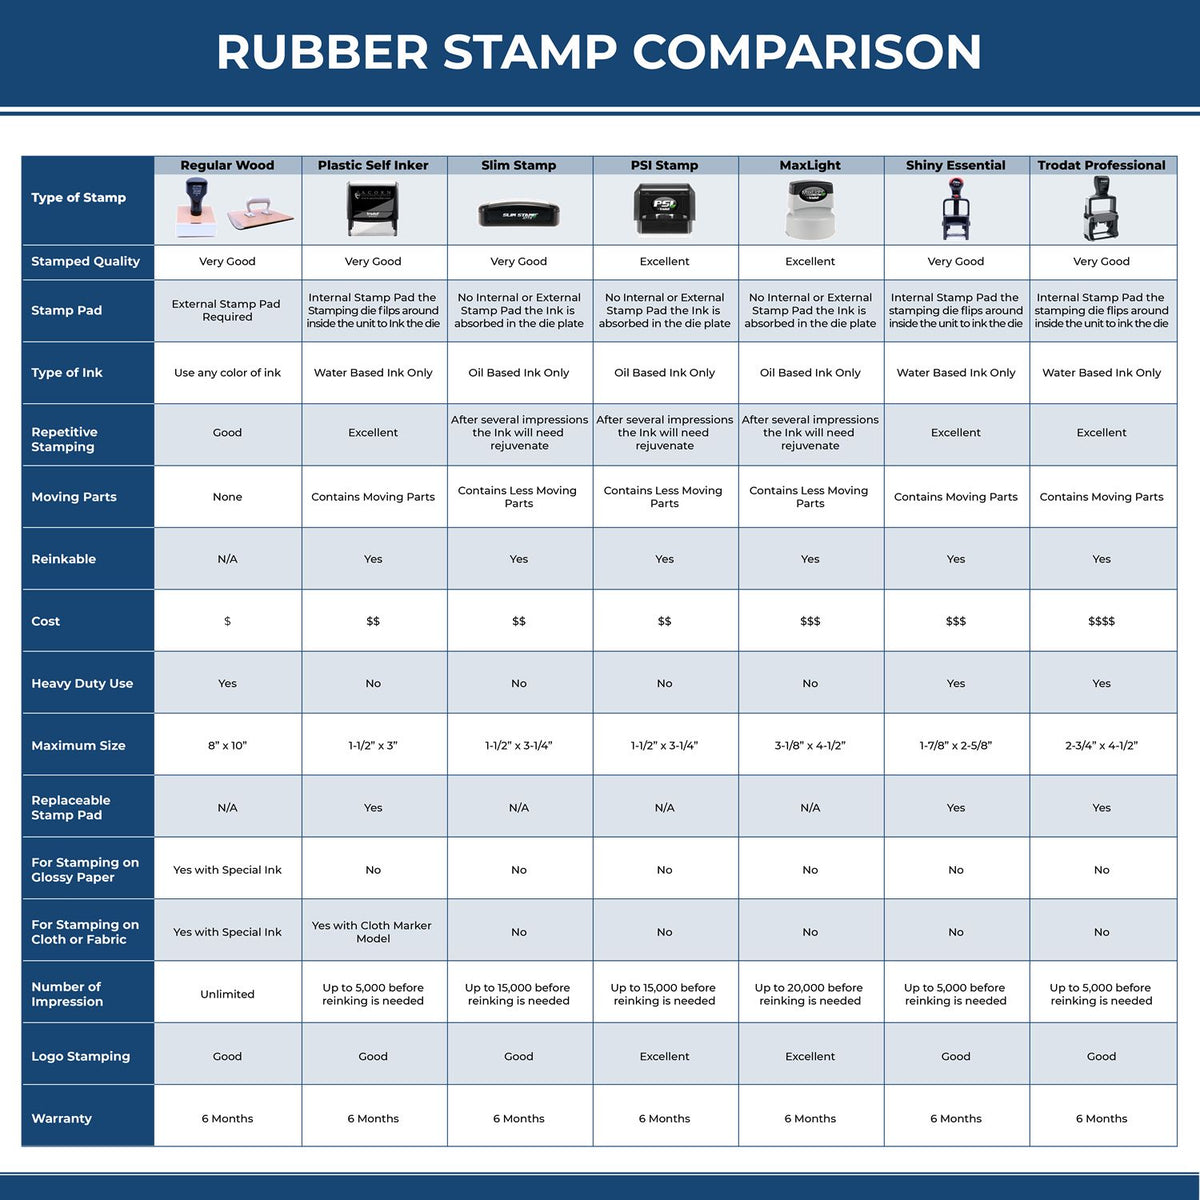 A comparison chart for the different types of mount models available for the MaxLight Premium Pre-Inked Puerto Rico Rectangular Notarial Stamp.